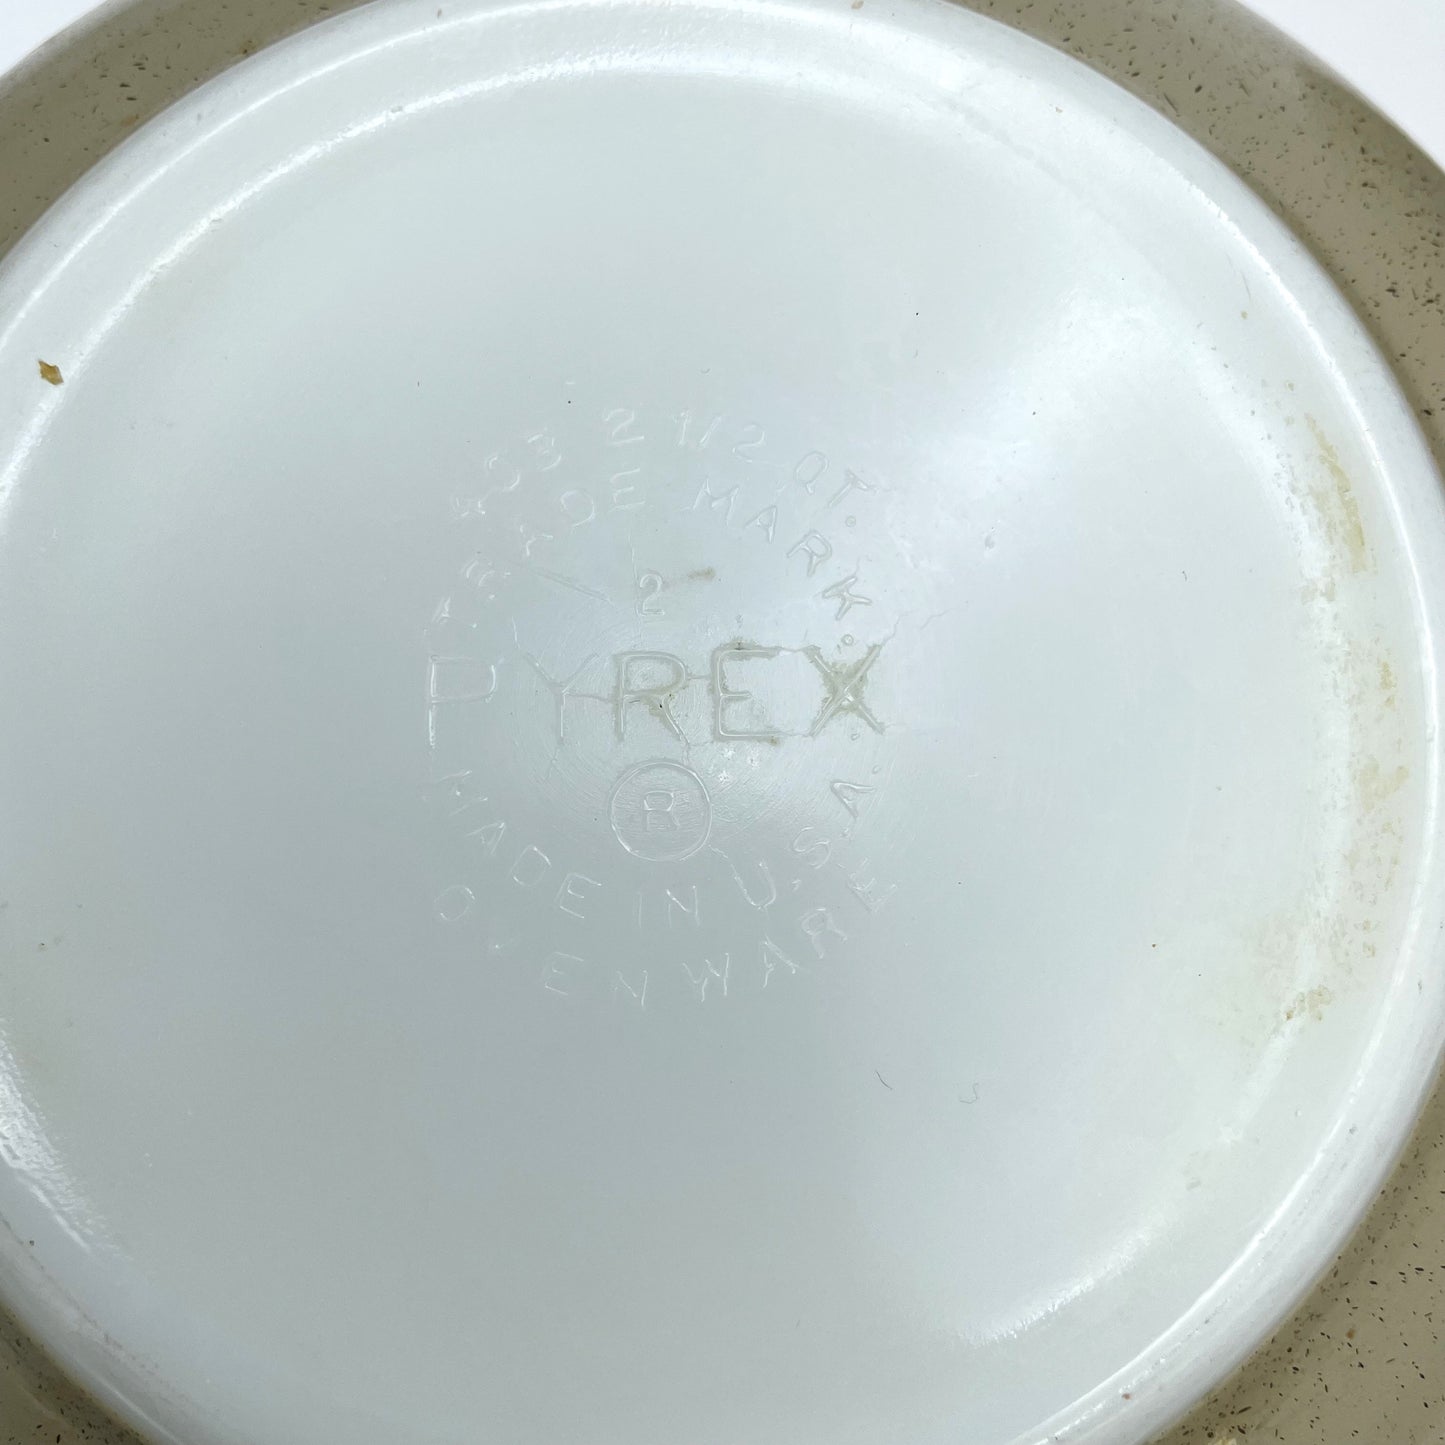 Vintage Pyrex Mixing Bowl 'Homestead' - Made in USA